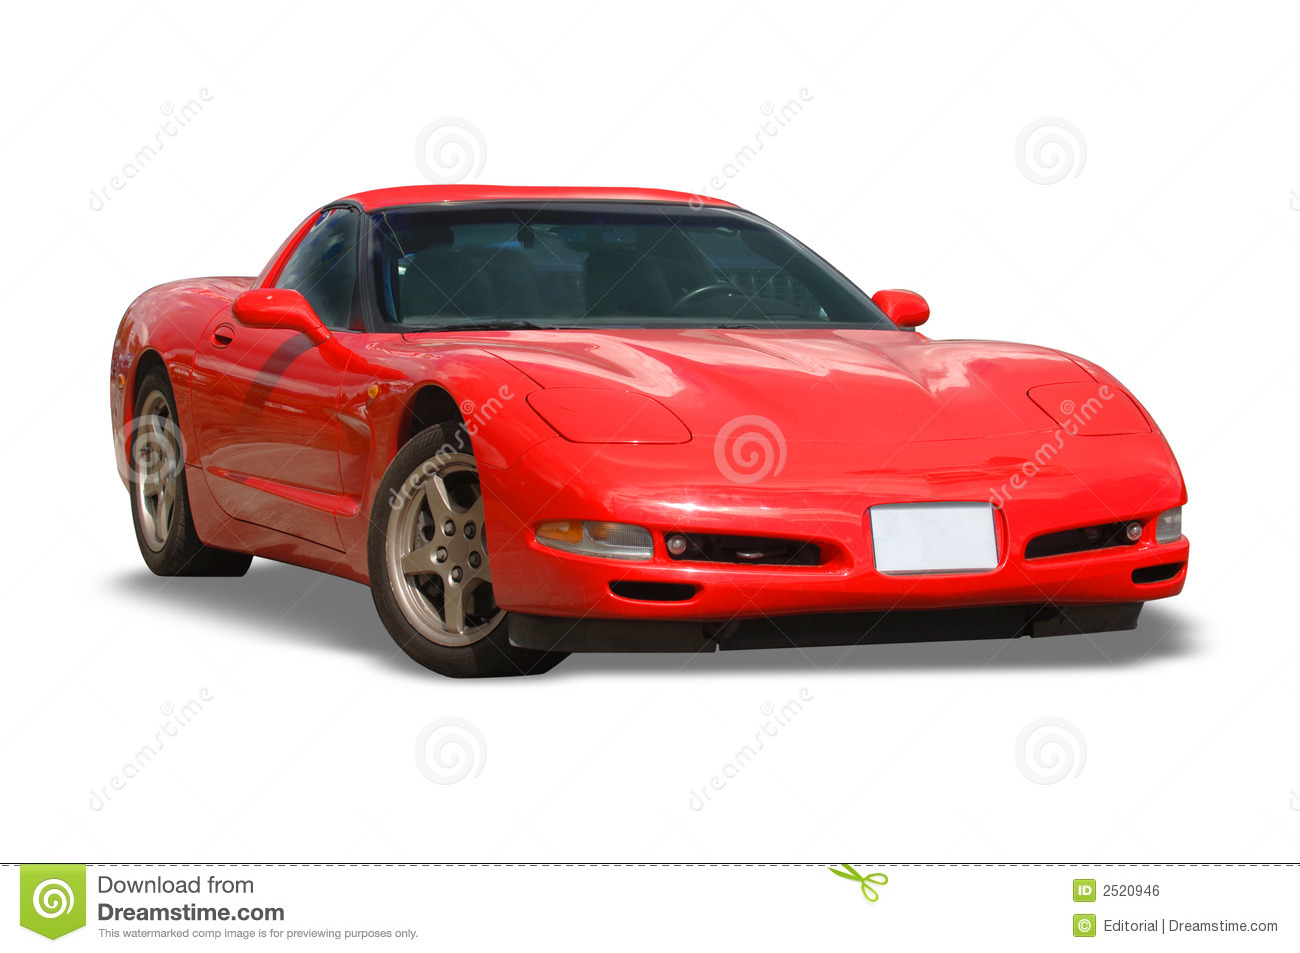 Royalty Free Stock Image  Red Corvette Car  Image  2520946